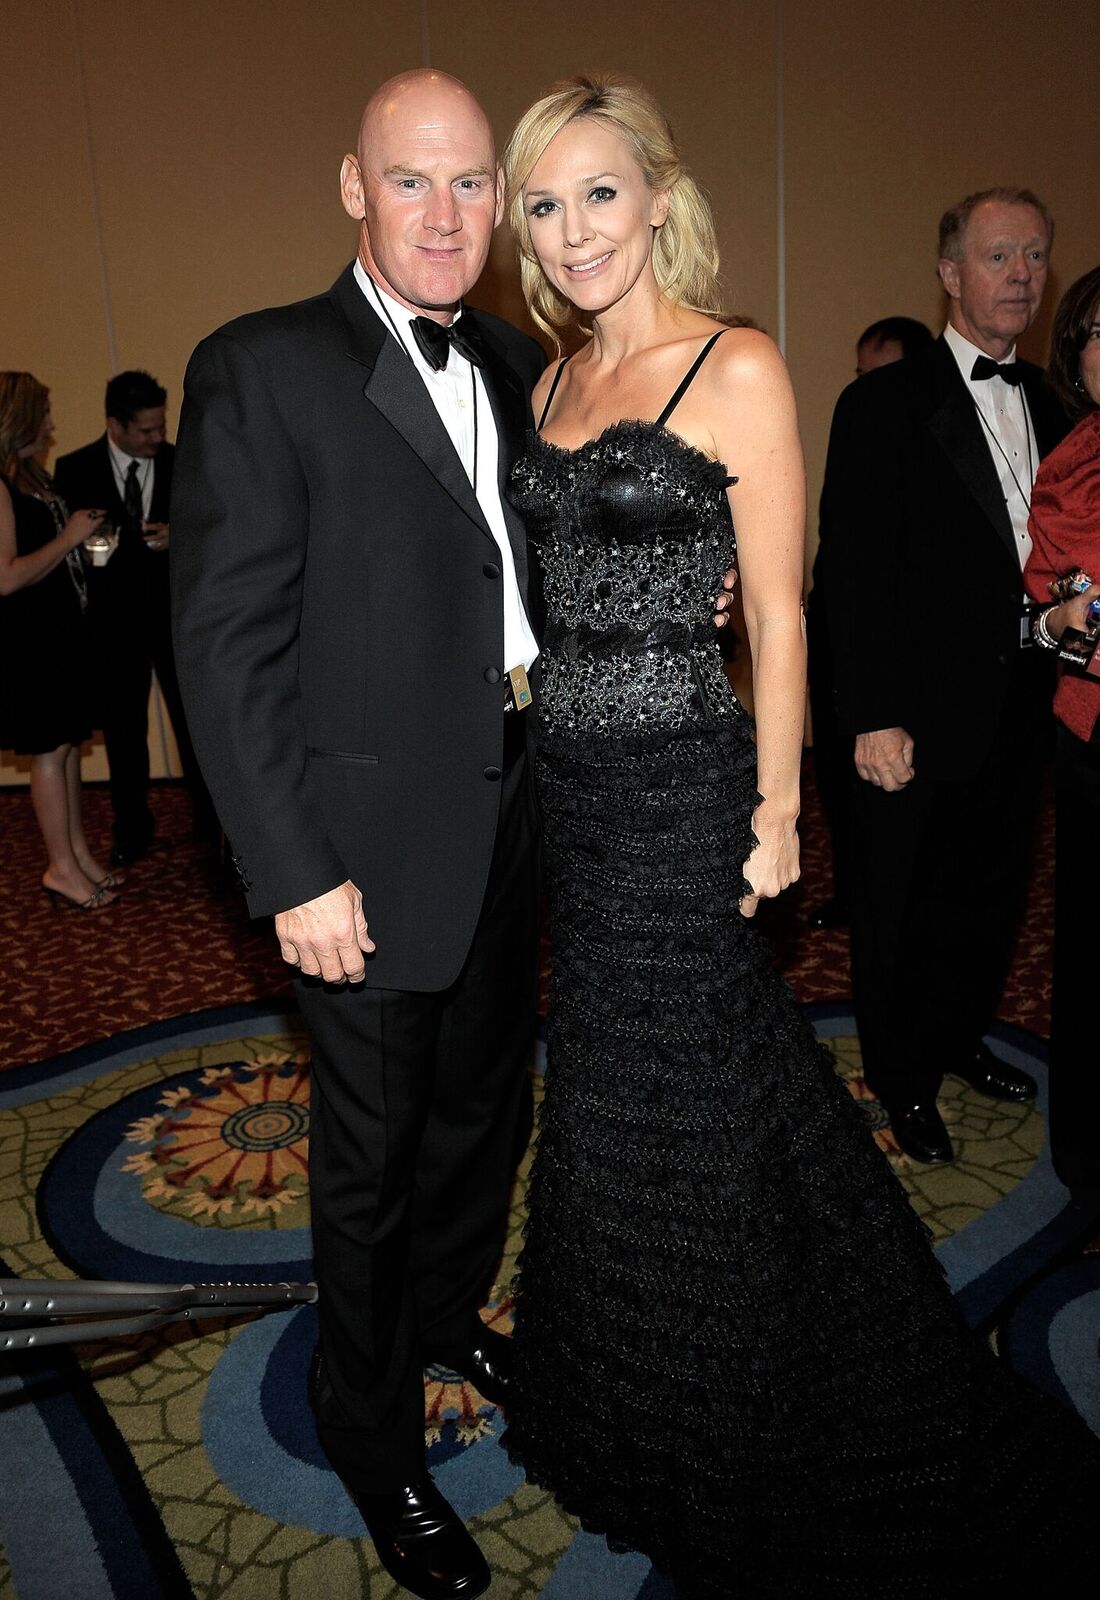 Matt Williams and Erika Monroe at the Muhammad Ali's Celebrity Fight Night XVII in 2011 | Source: Getty Images